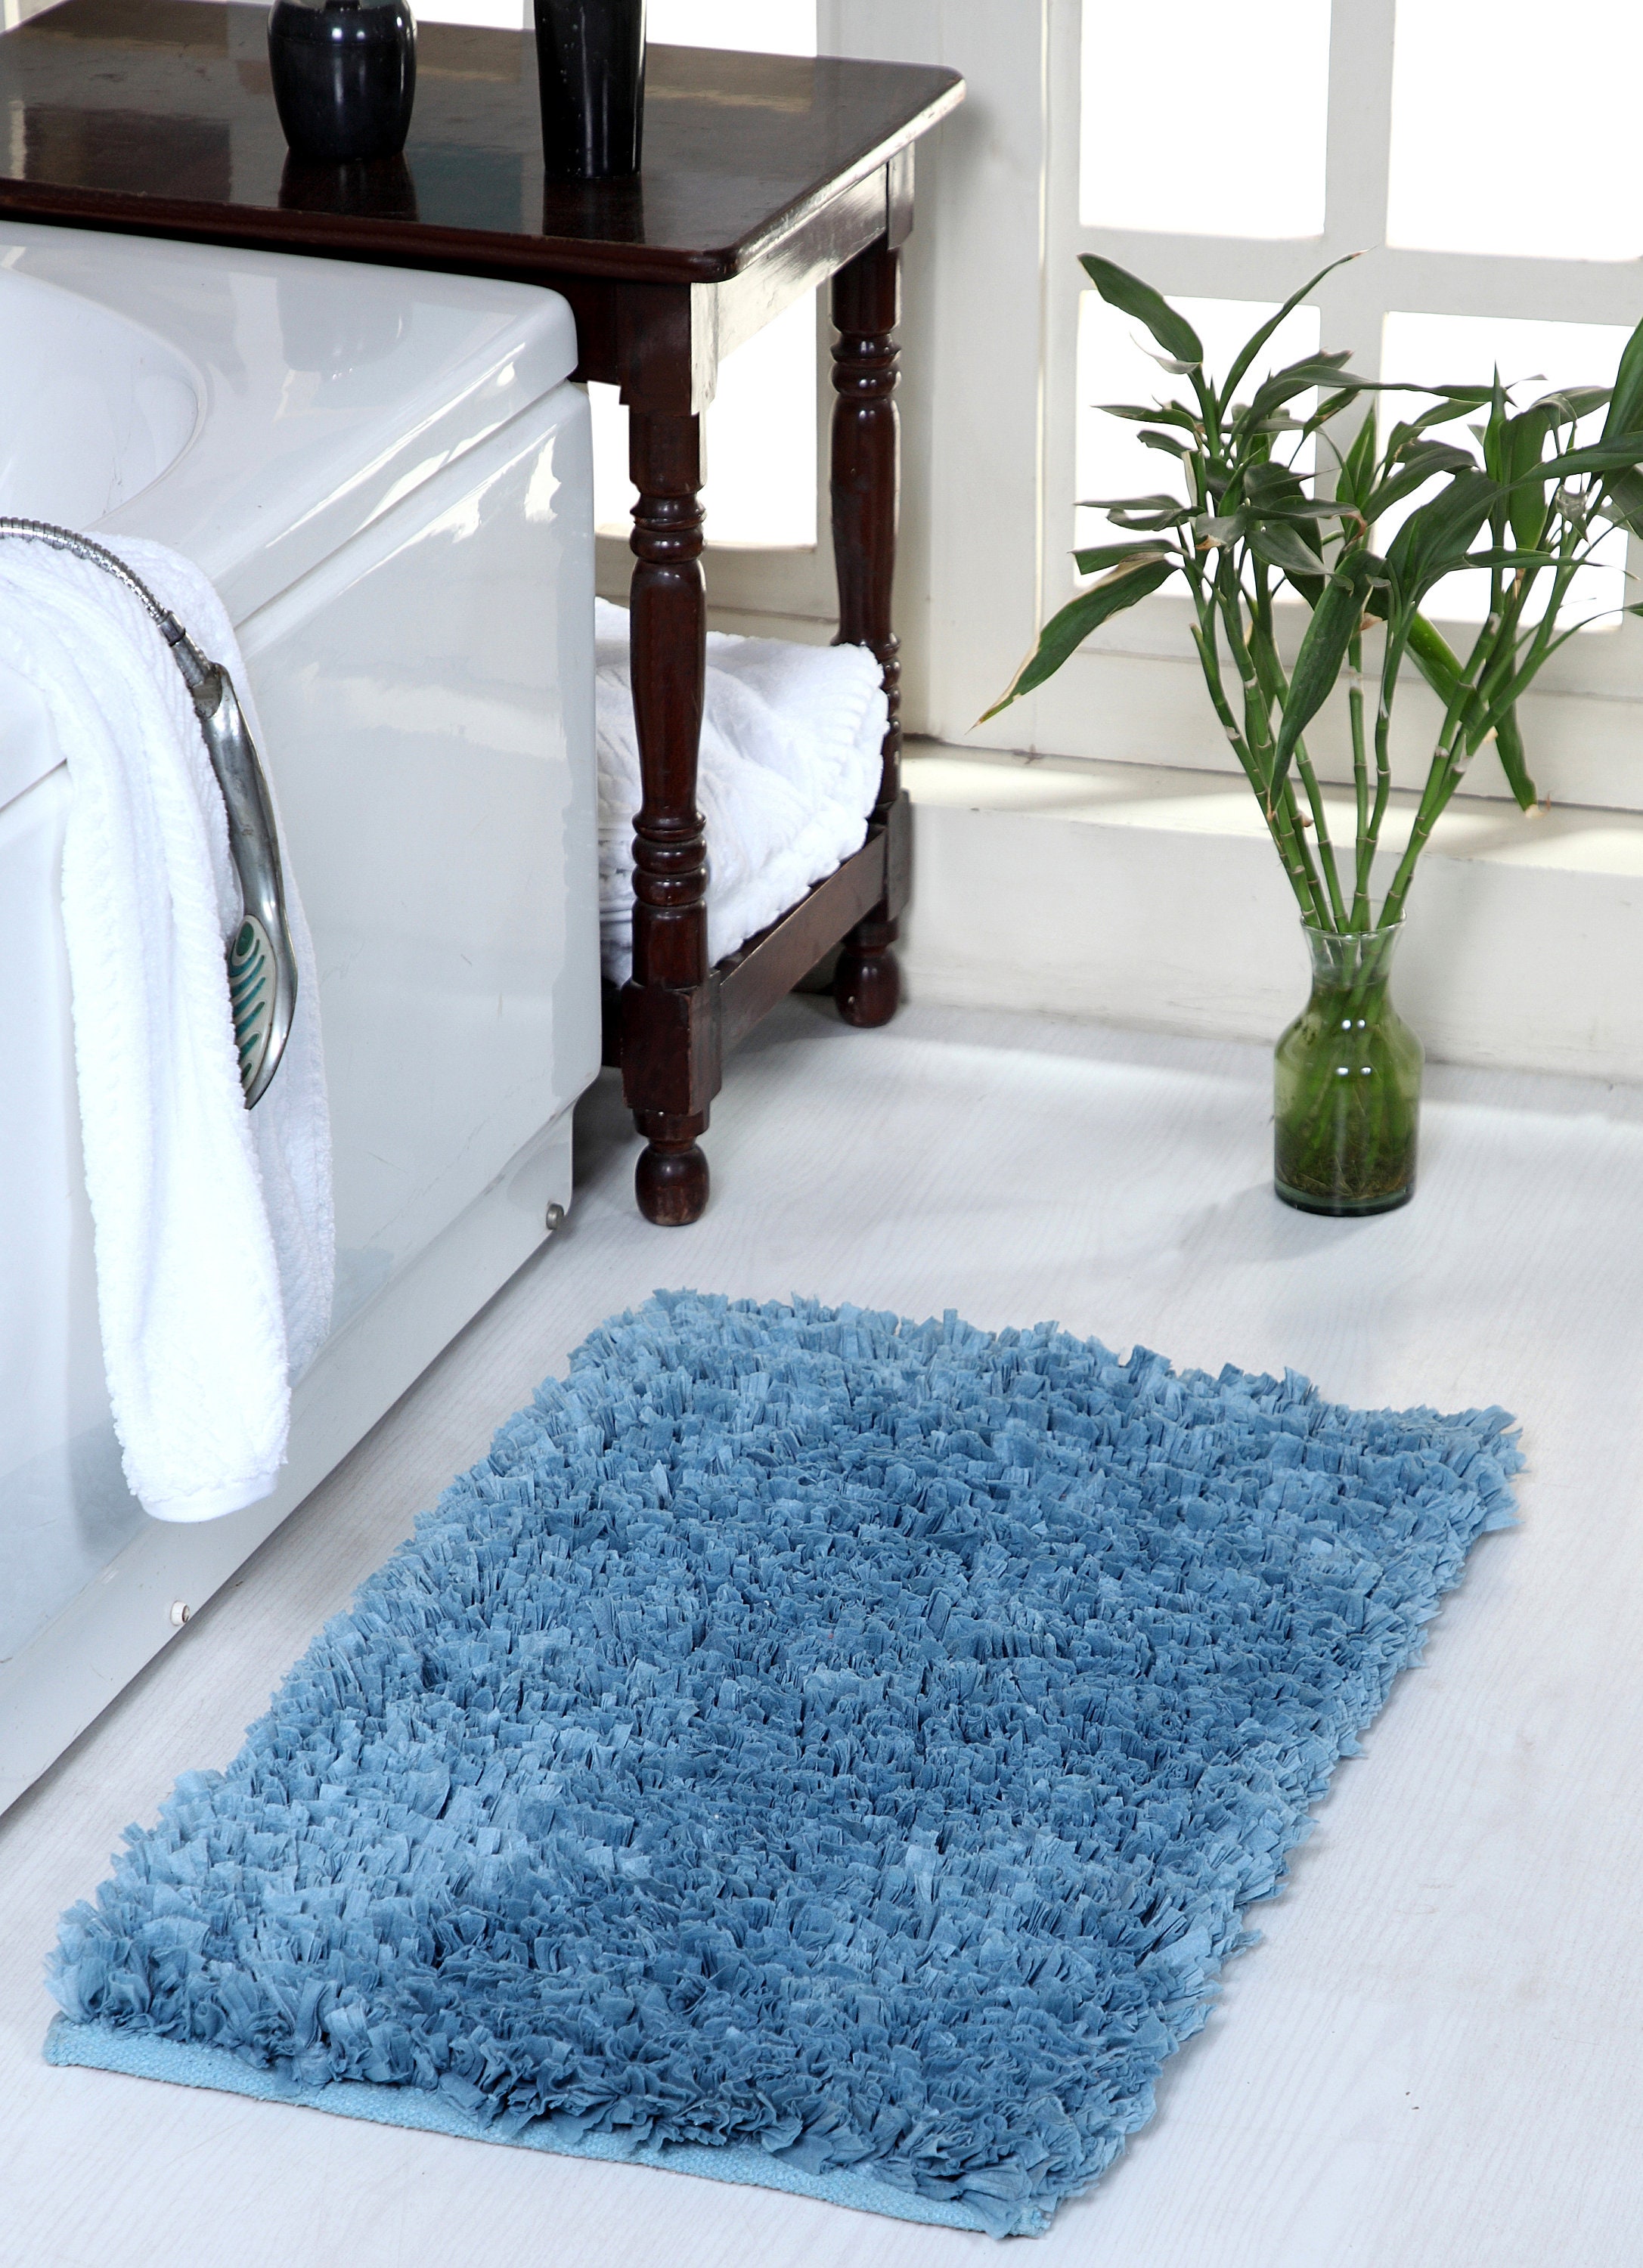 Olanly's Bathroom Rug Is on Sale for Just $30 at